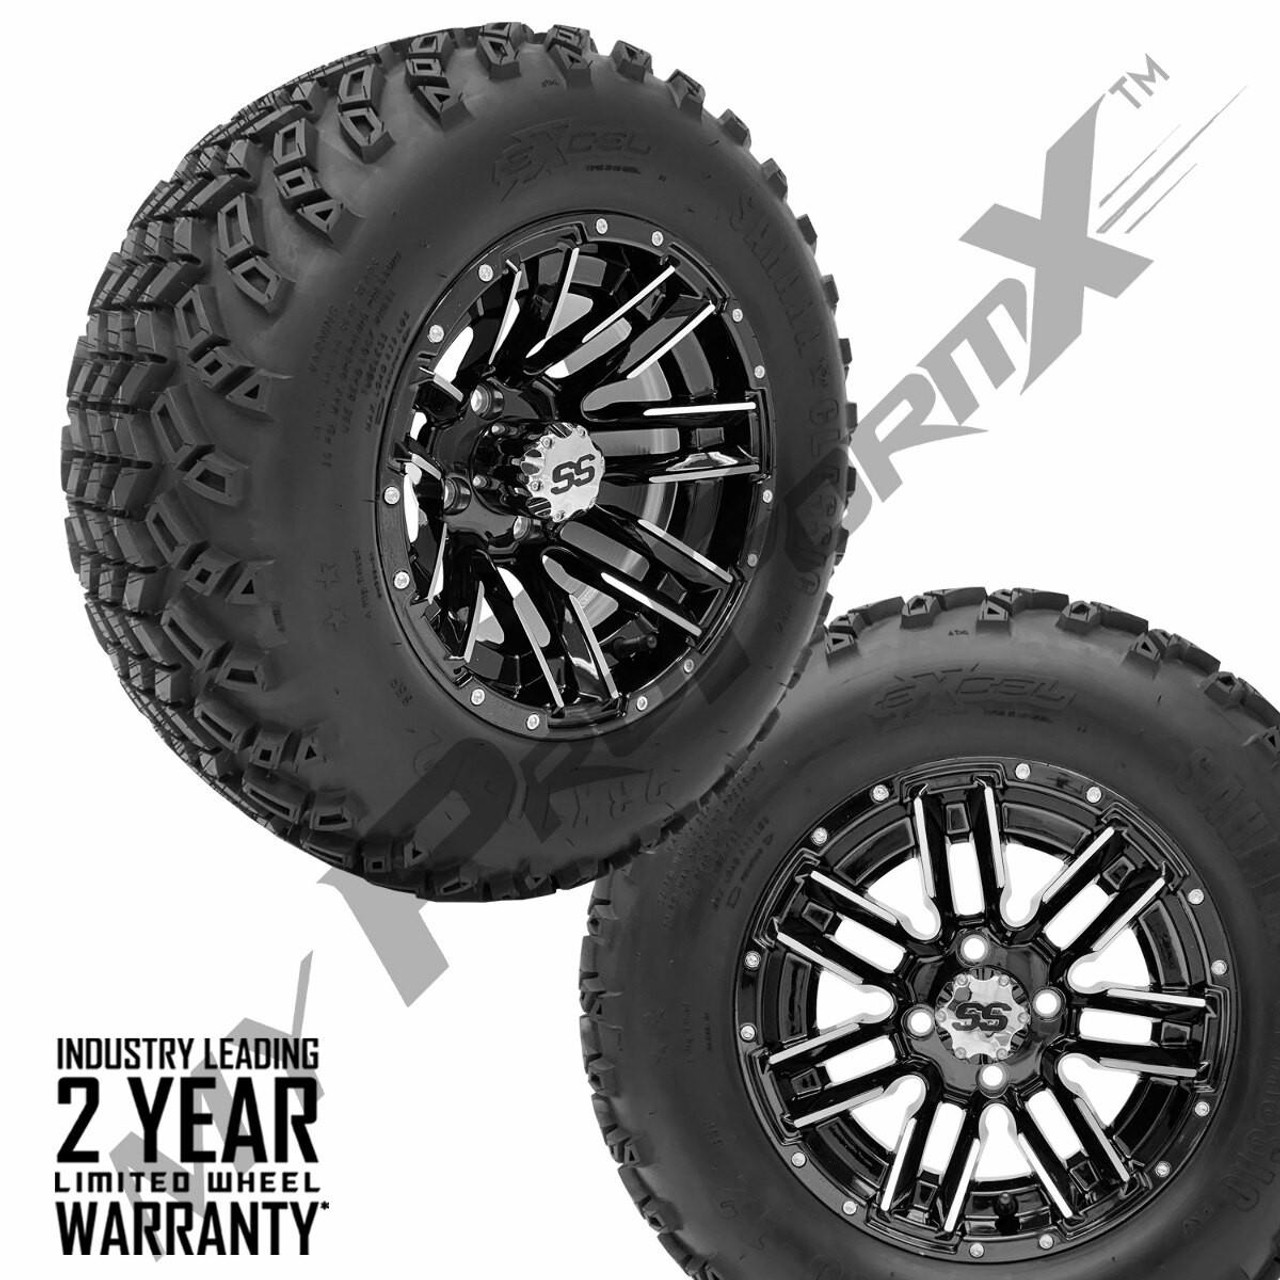 12" SLEDGE Mch/Blk Wheels on 23x10x12 Sahara Classic Pro AT Off-Road Tires - Watermark